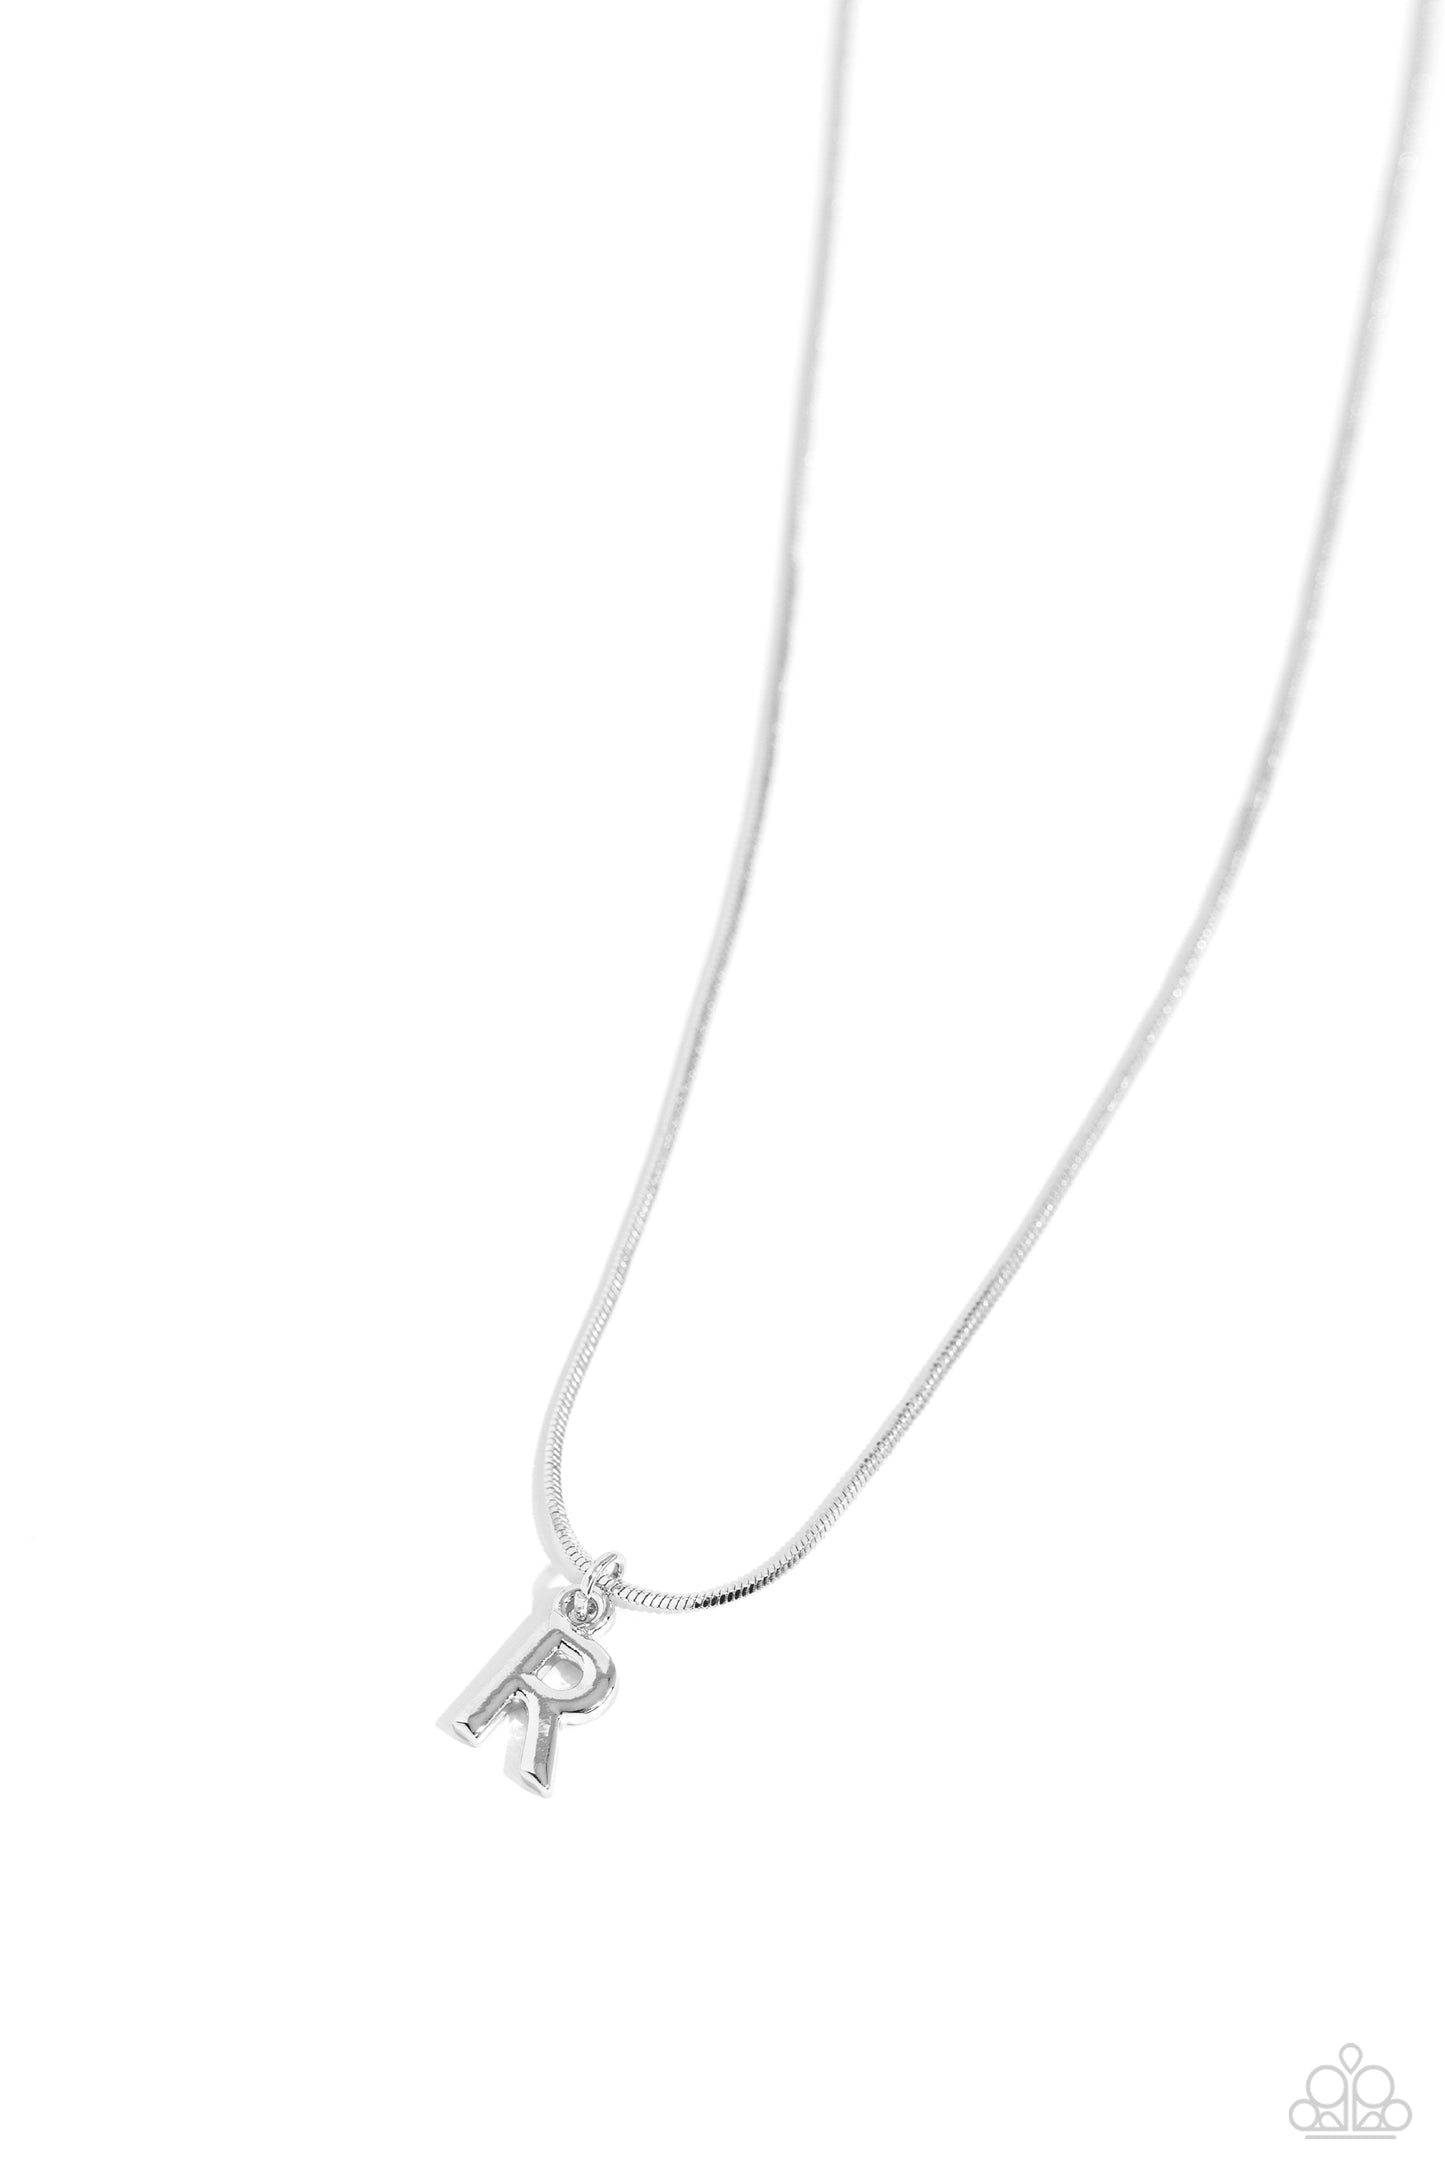 Seize the Initial Paparazzi Accessories Necklaces with Earrings Silver - R